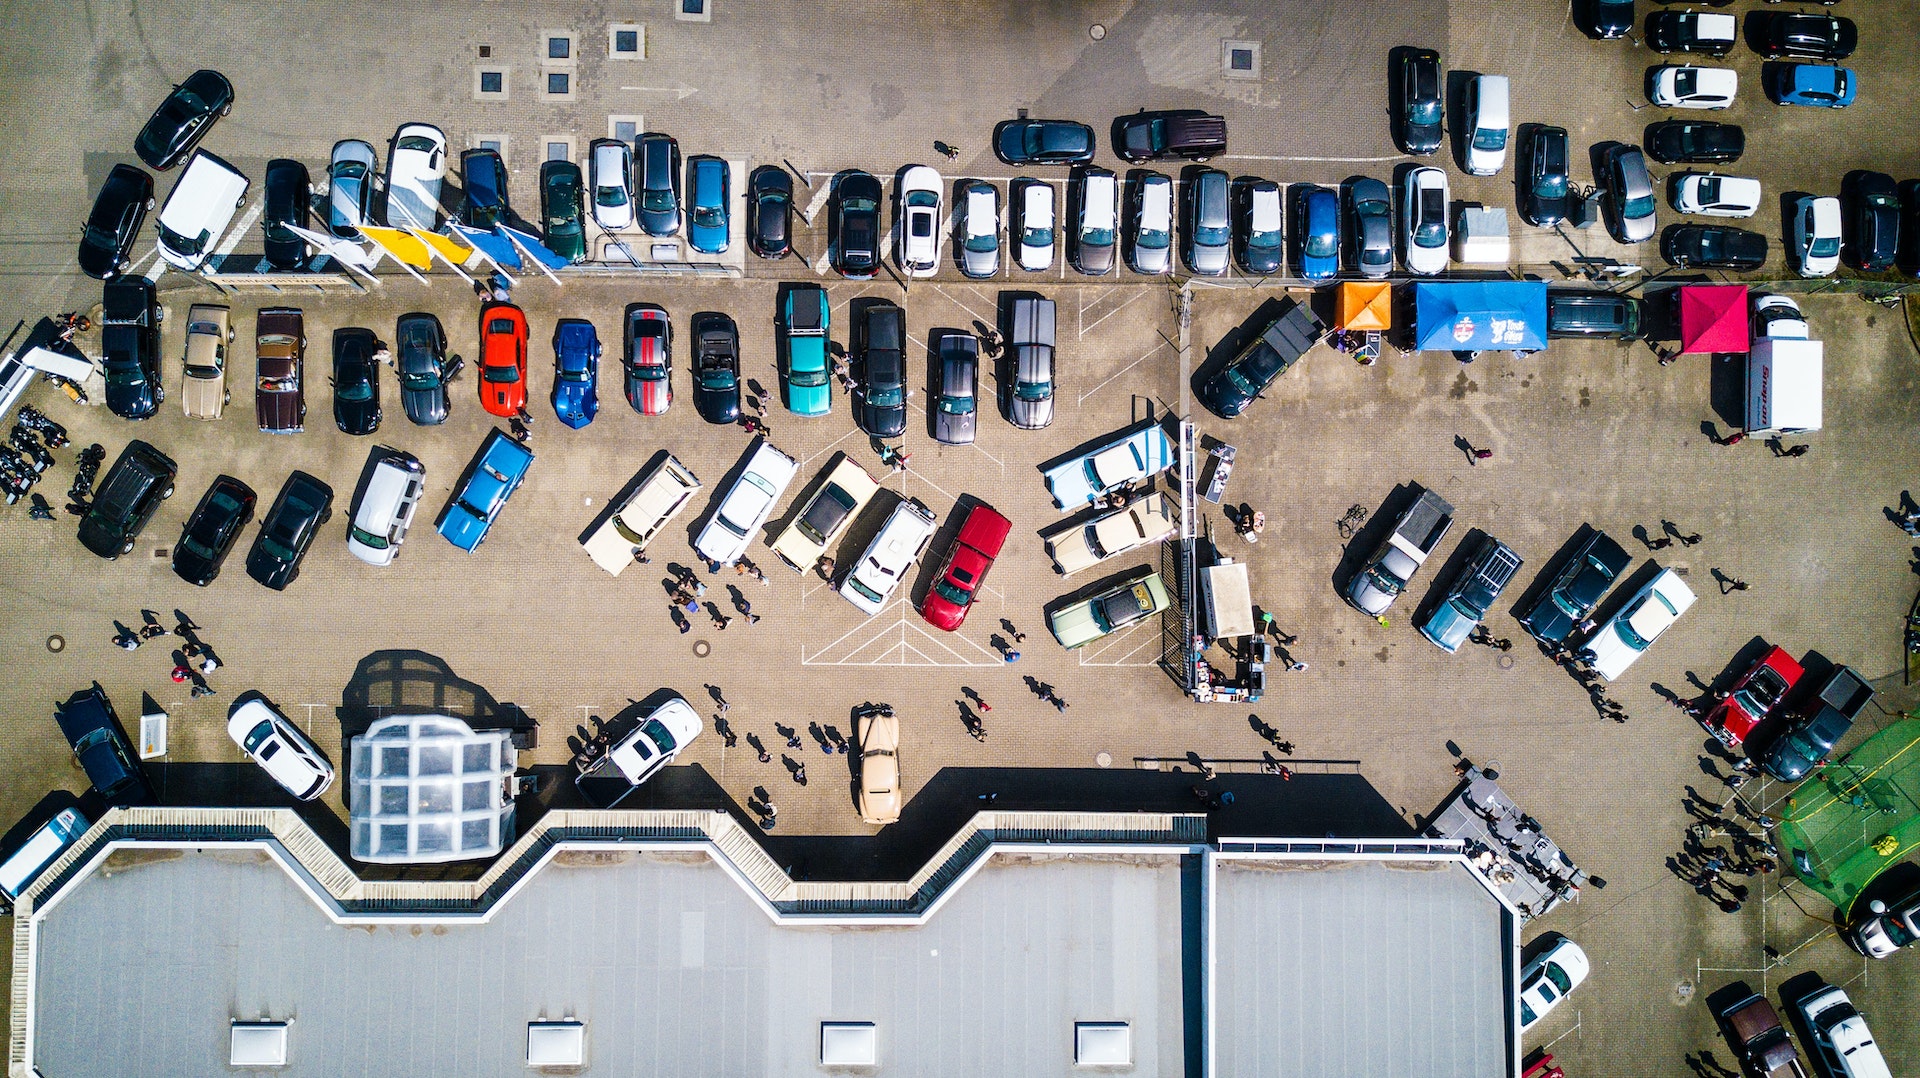 an aerial shot of a dealership with vehicles parked outside where falling used car prices have impacted the market